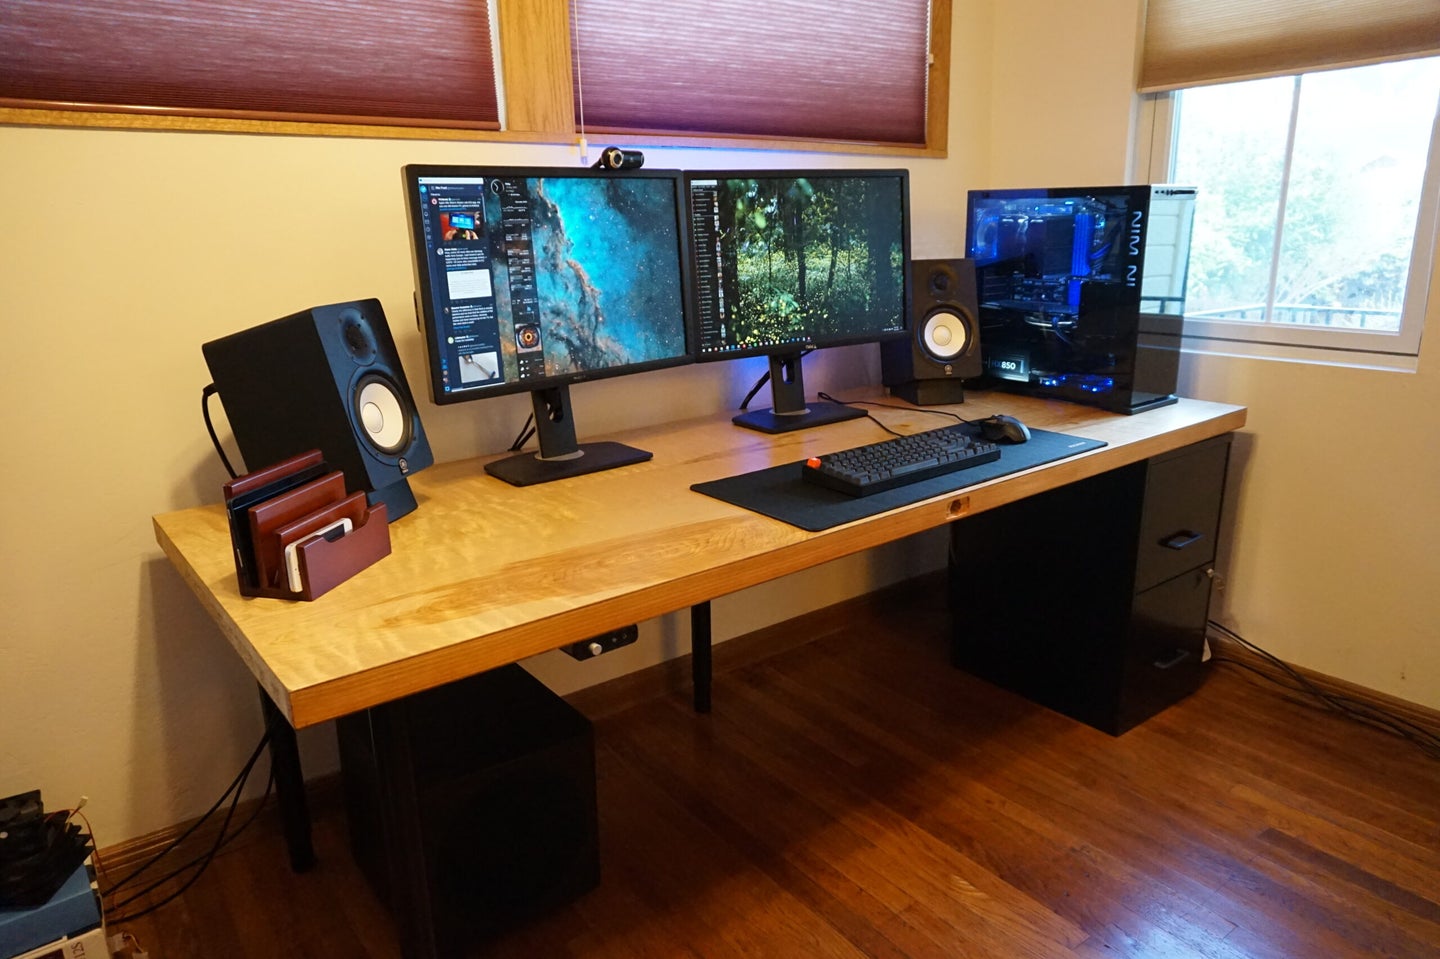 A DIY computer desk made out of a wooden door and some metal legs, with a dual-monitor computer and other devices on top of it.